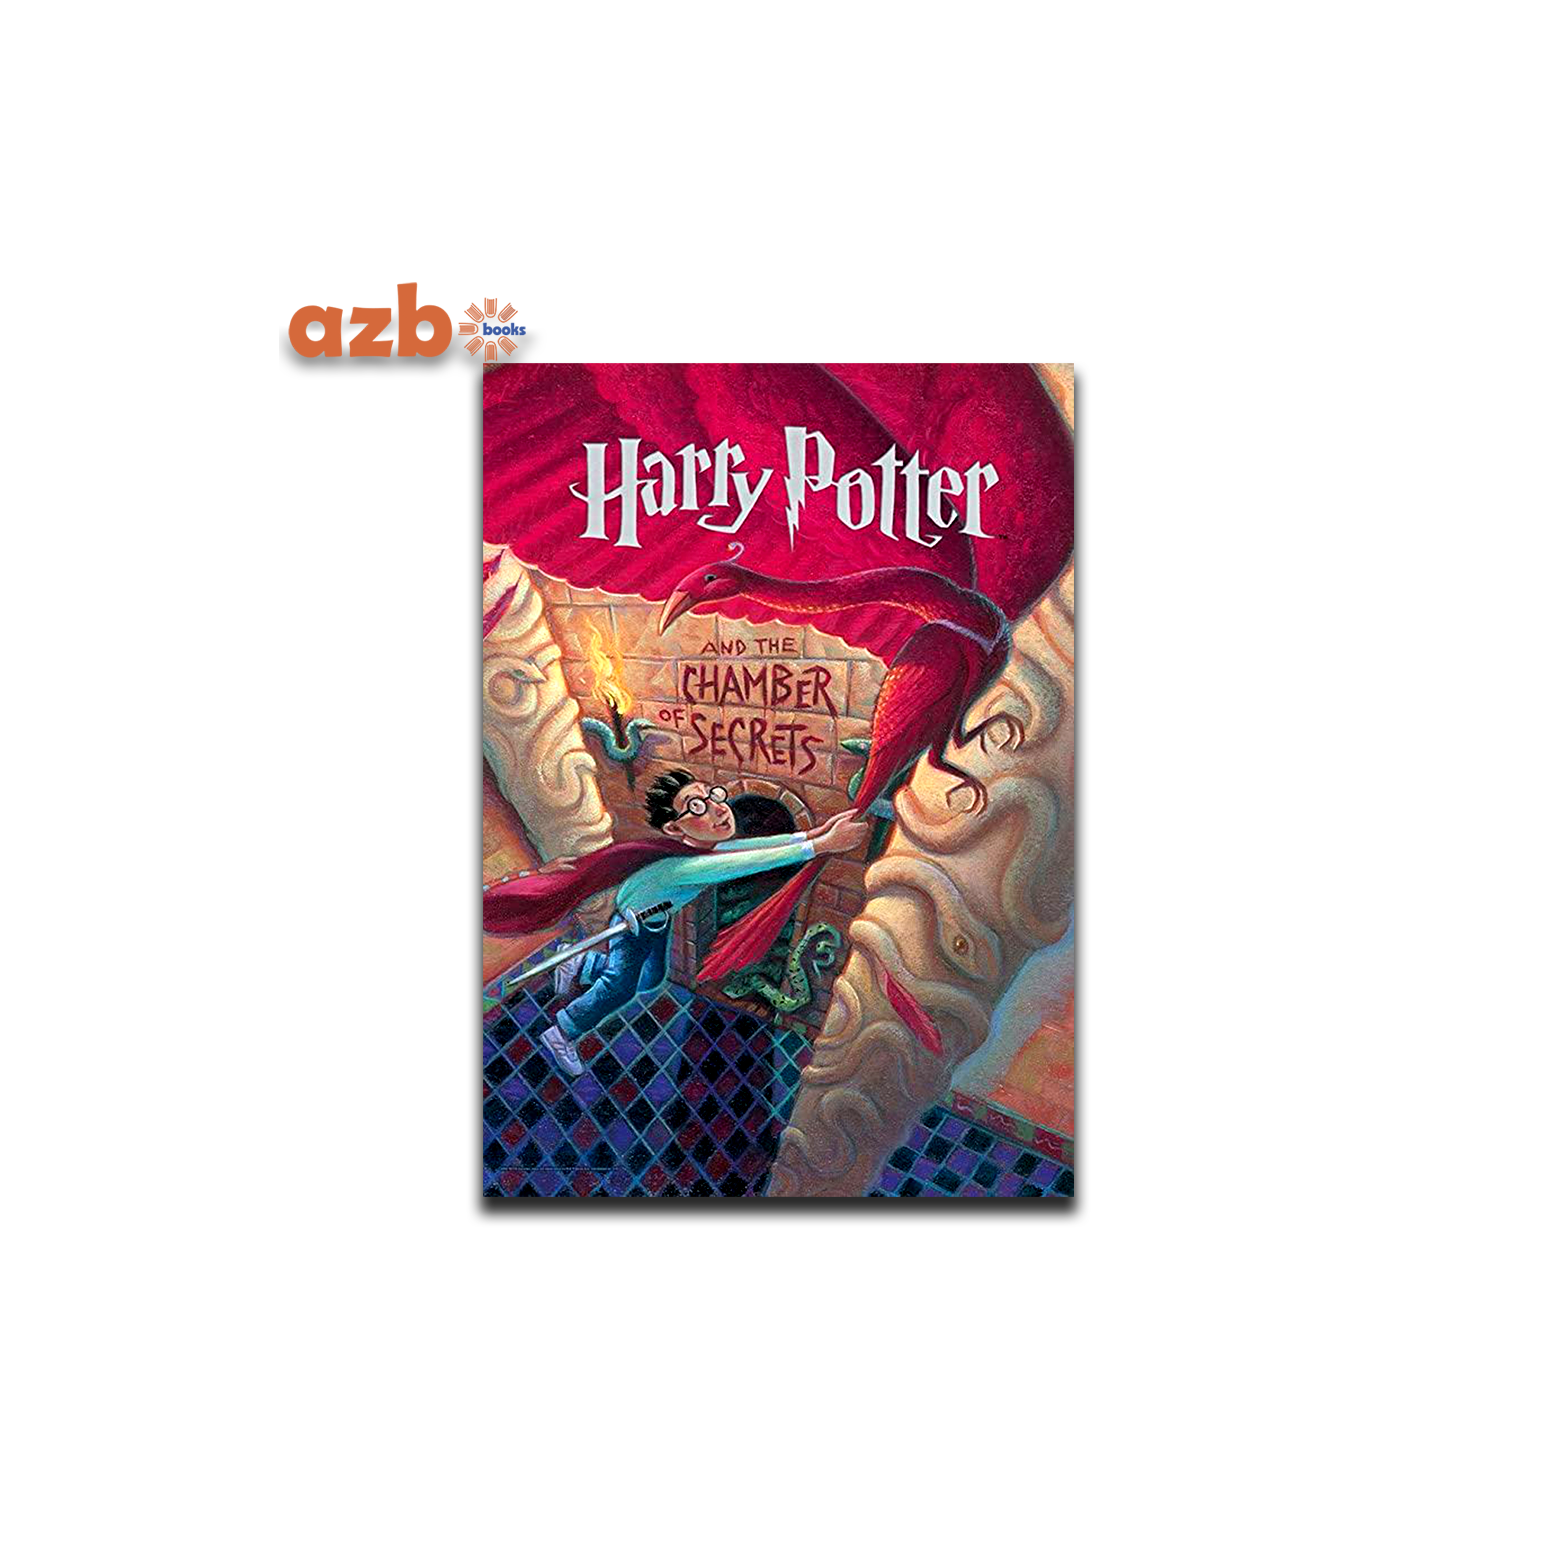 J. K. Rowling: Harry Potter and the Chamber of Secrets